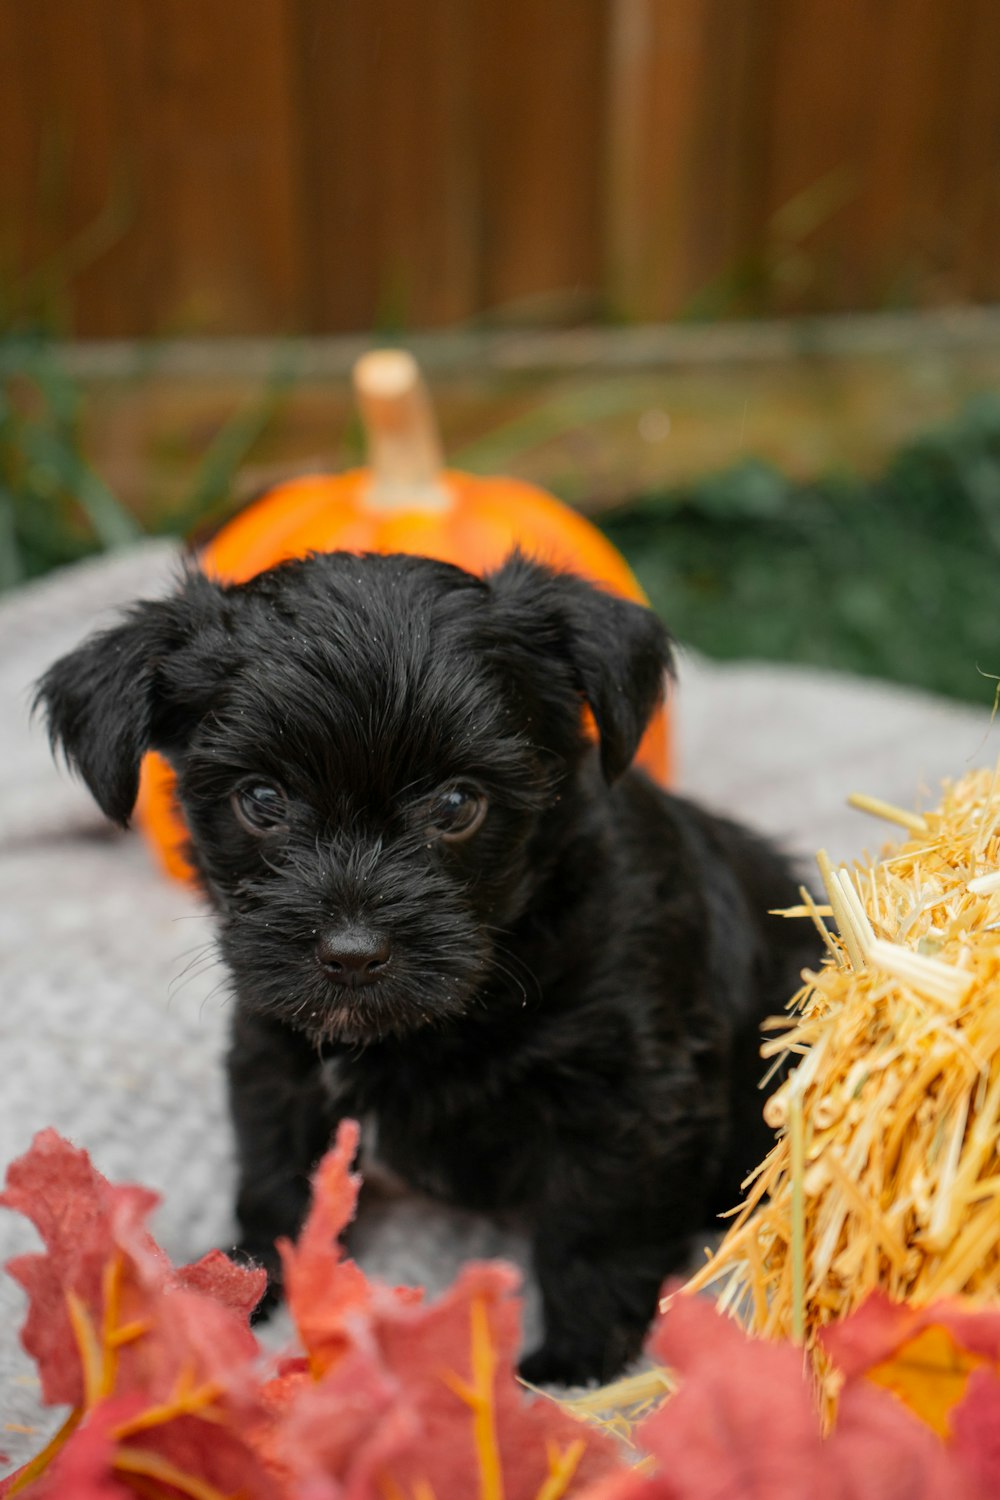 a small black dog sitting next to a pile of hay